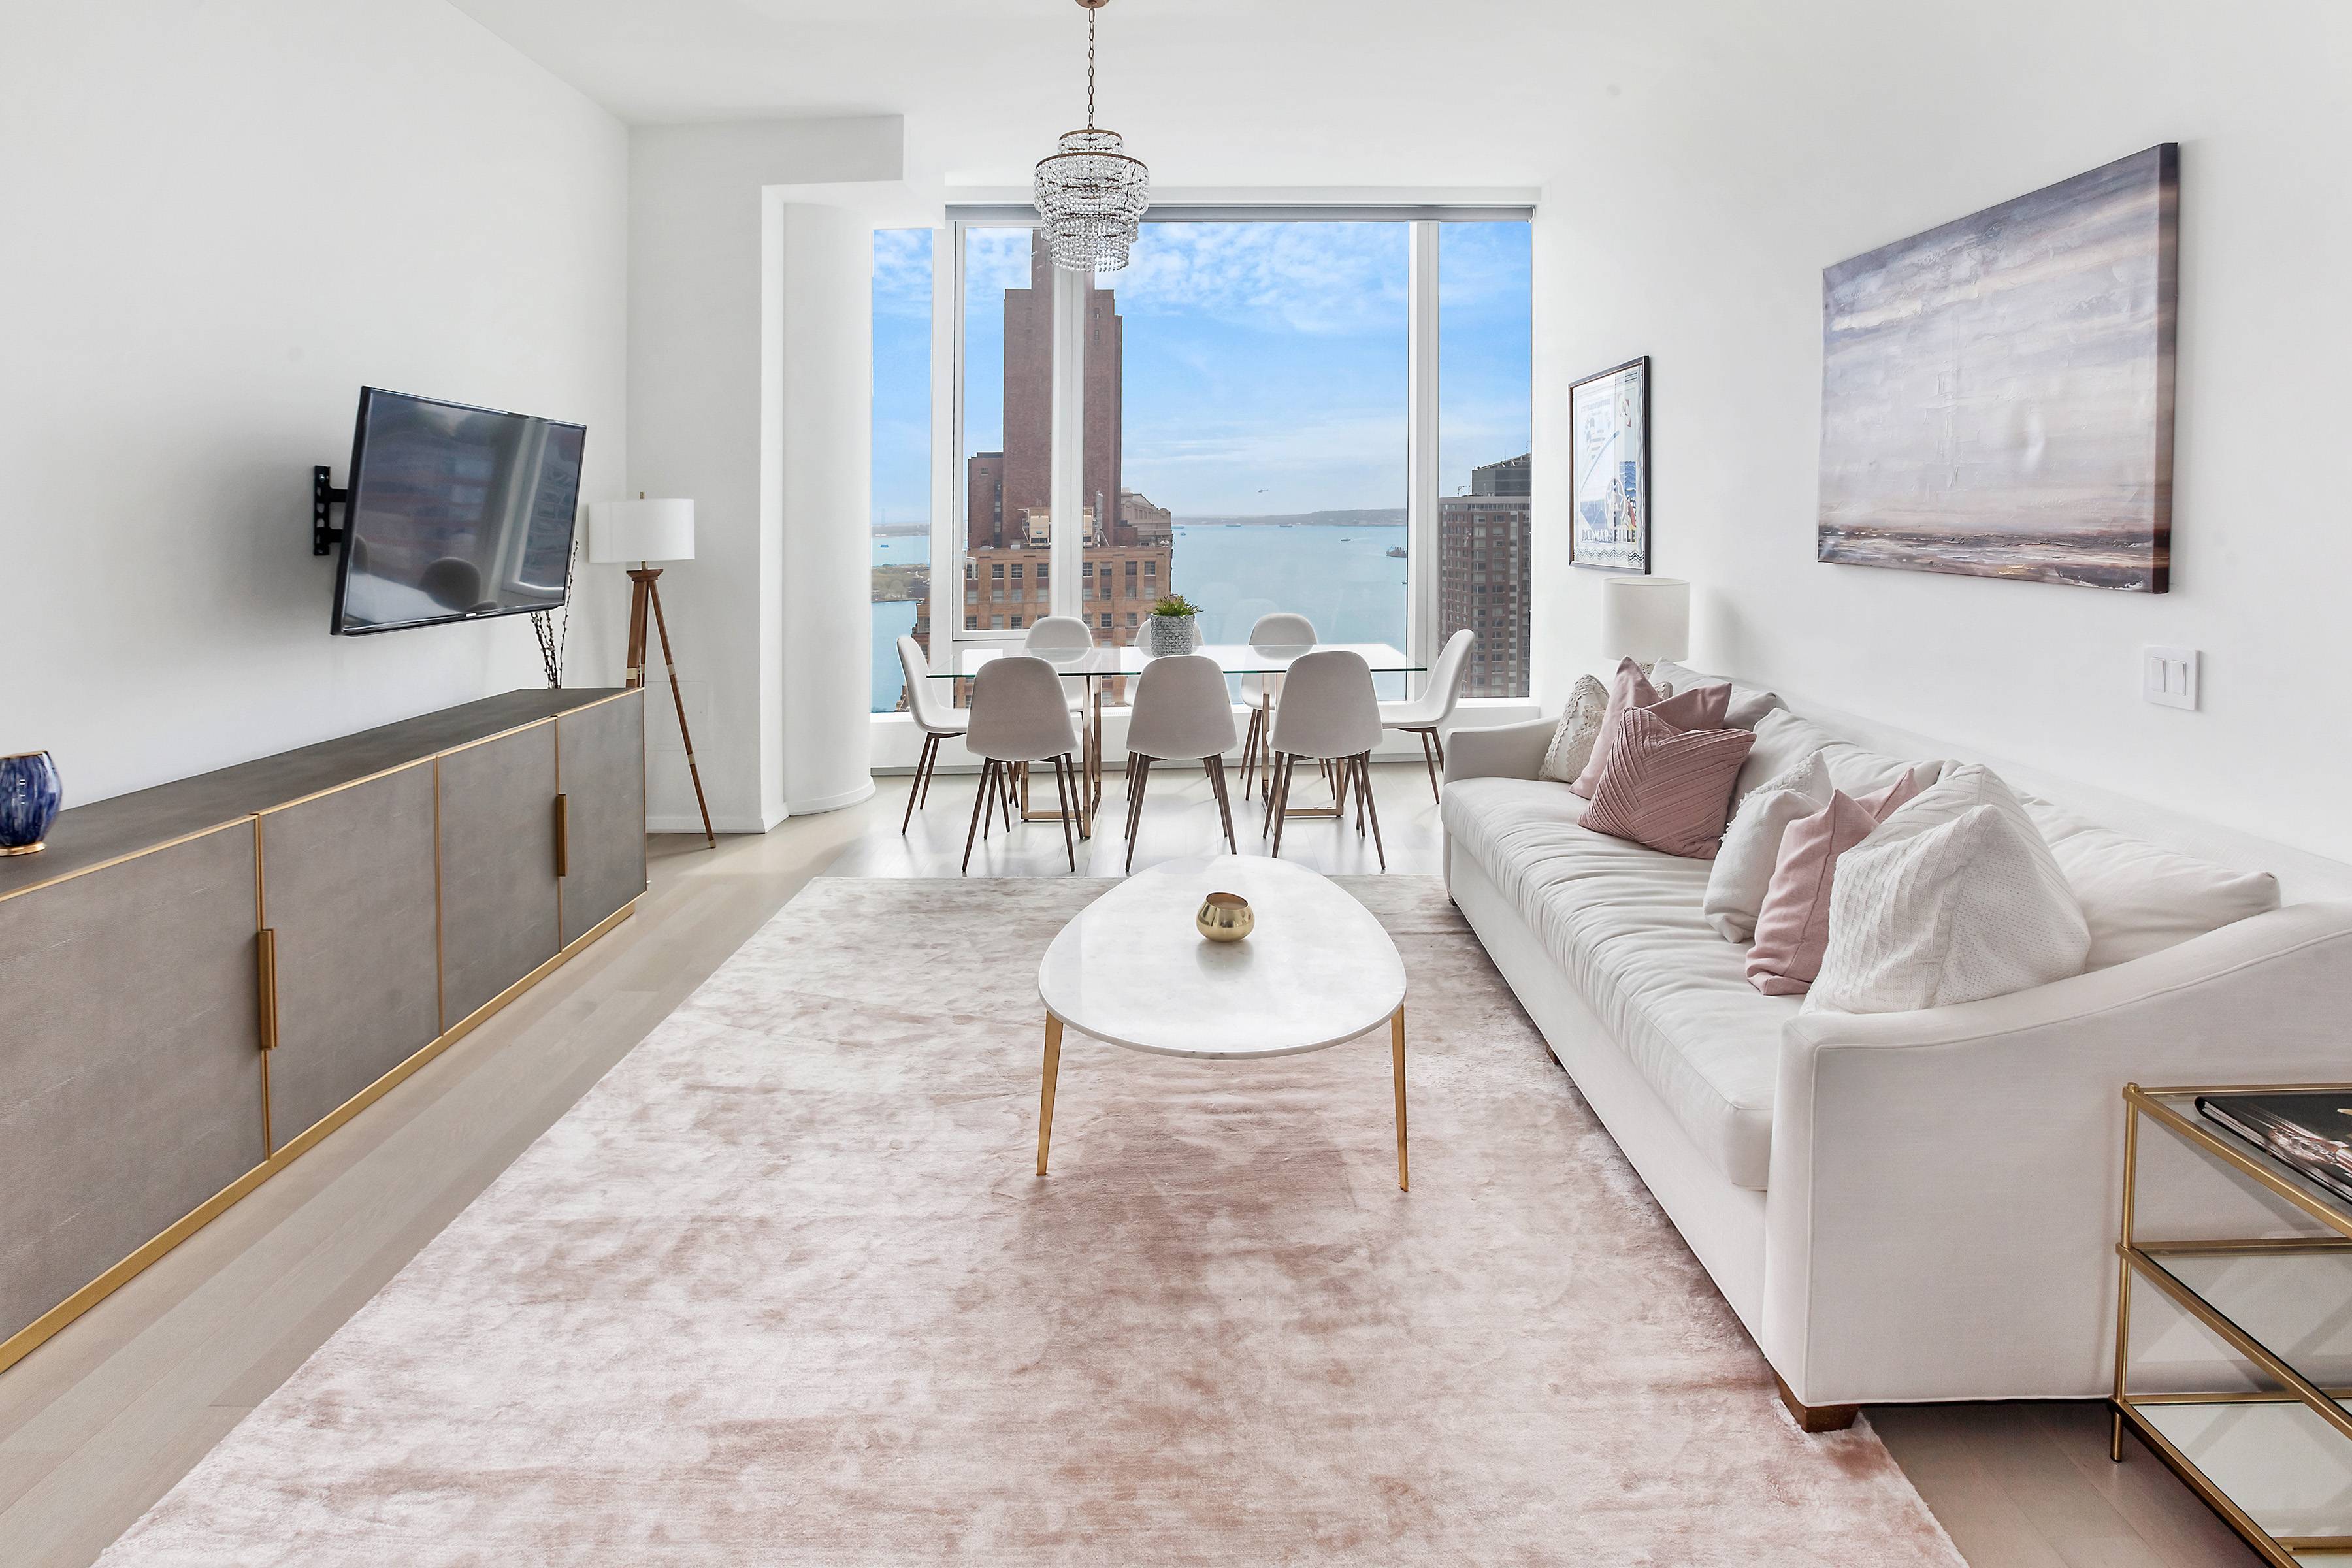 Brand new, highest 1 bed 1 bath in the building with expansive southern city, river and Statue of Liberty views through a massive wall of windows.